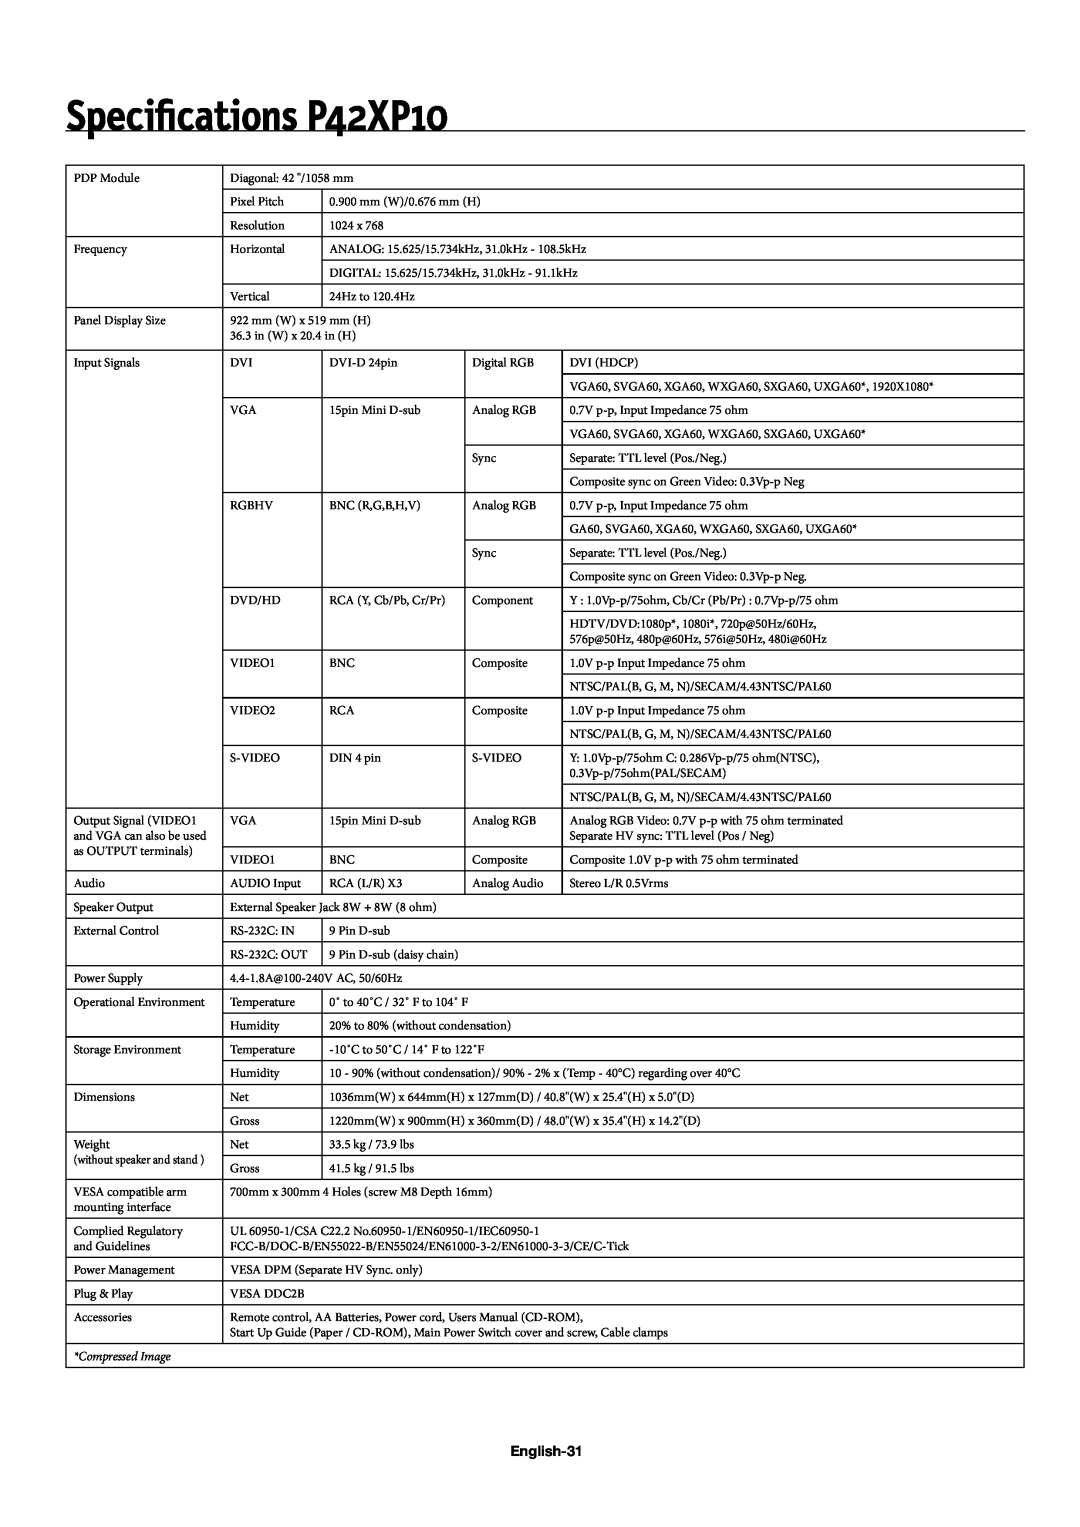 NEC 50XP10, 60XP10 user manual Speciﬁcations P42XP10, English-31, Compressed Image 